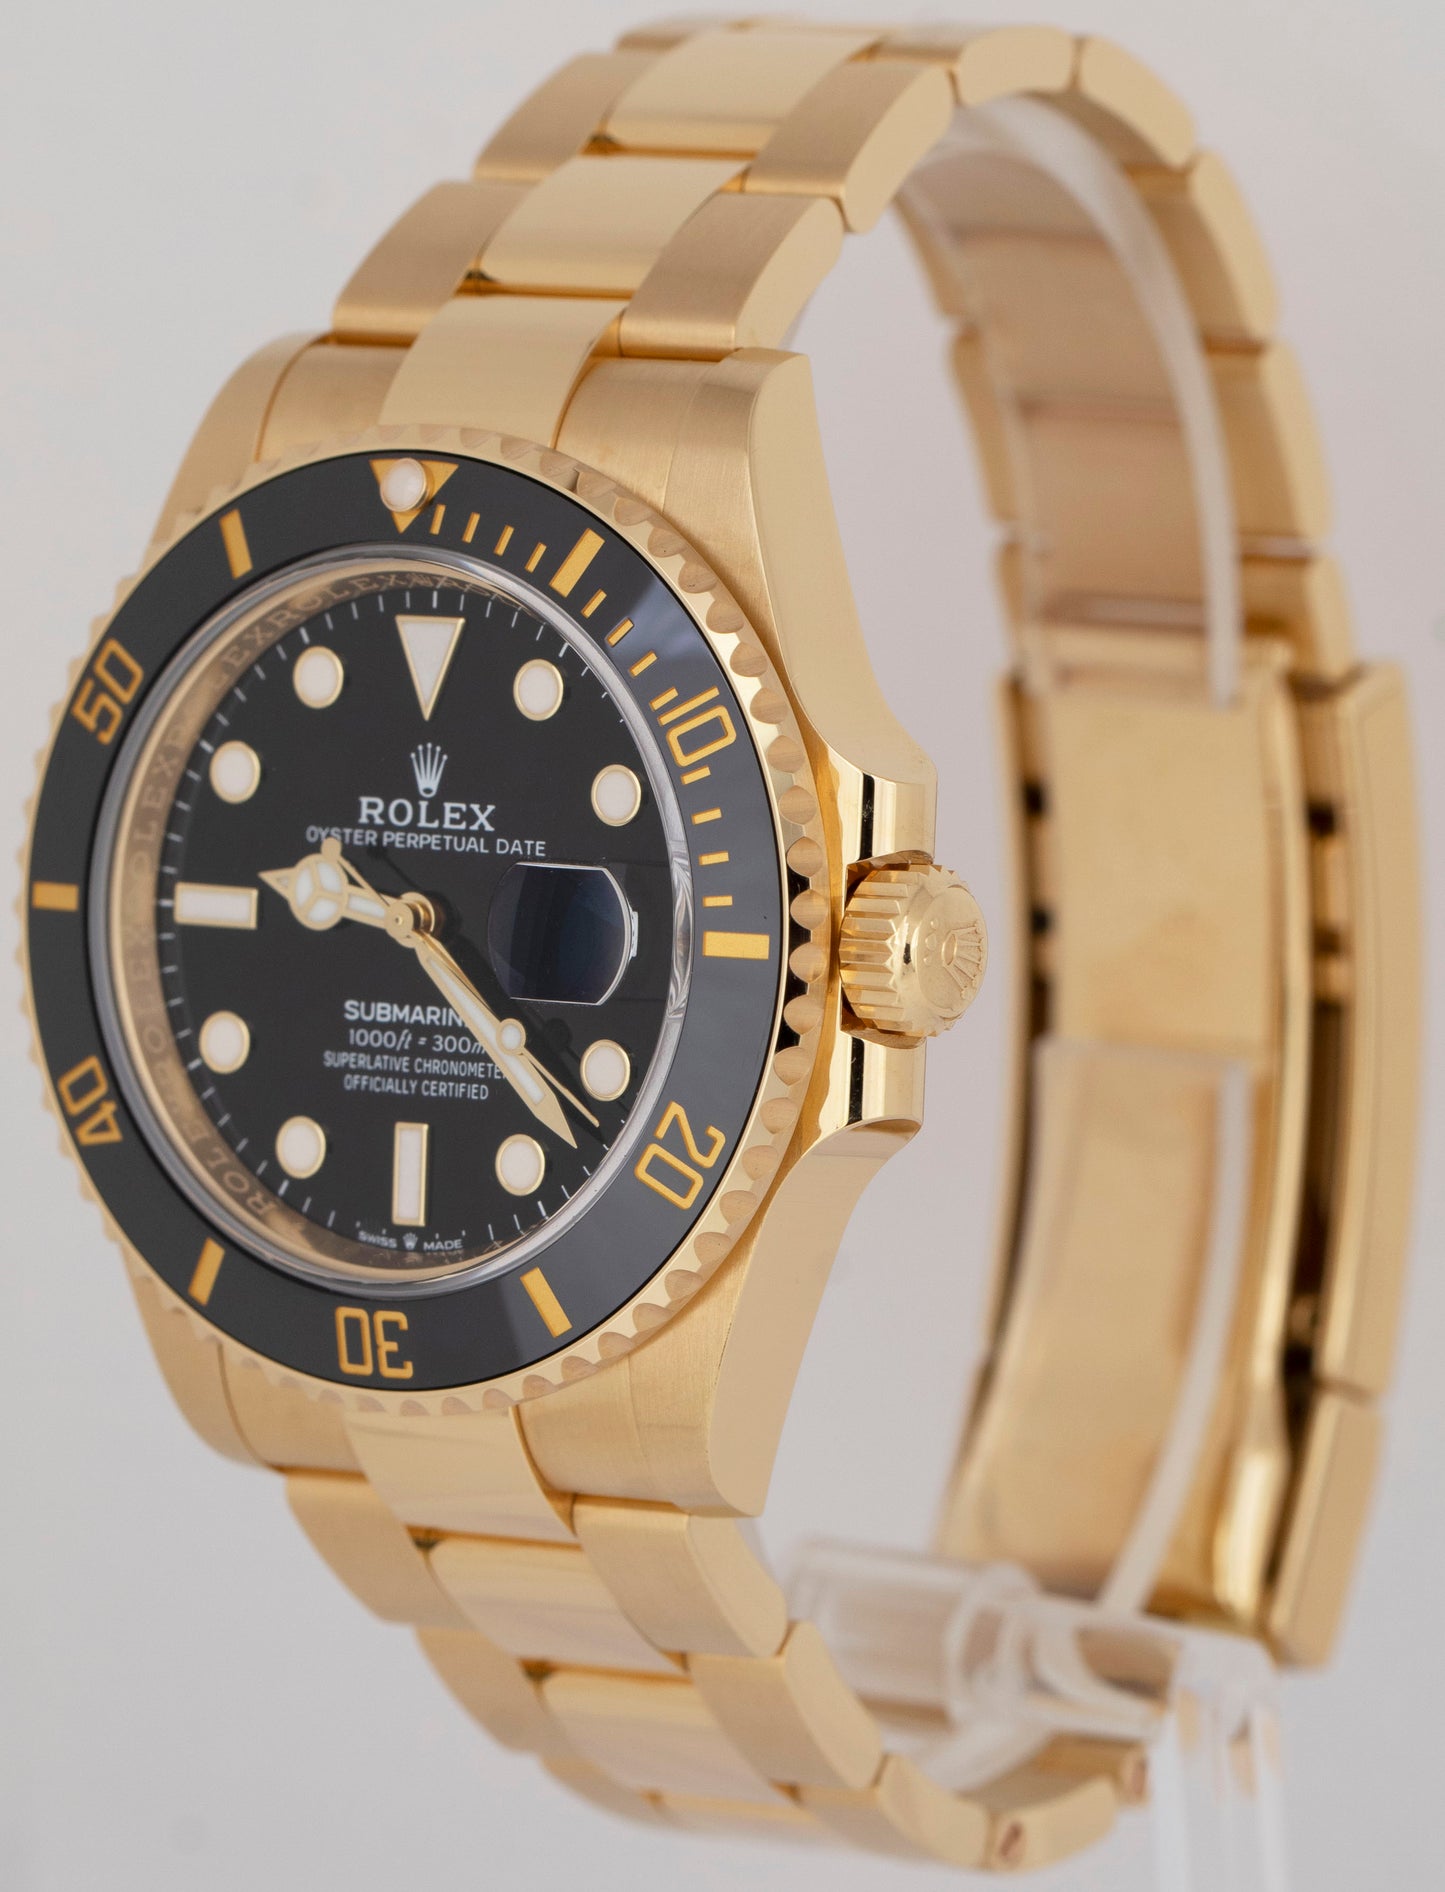 BRAND NEW 2023 PAPERS Rolex Submariner Date 41 Gold Black Watch 126618 LN B+P